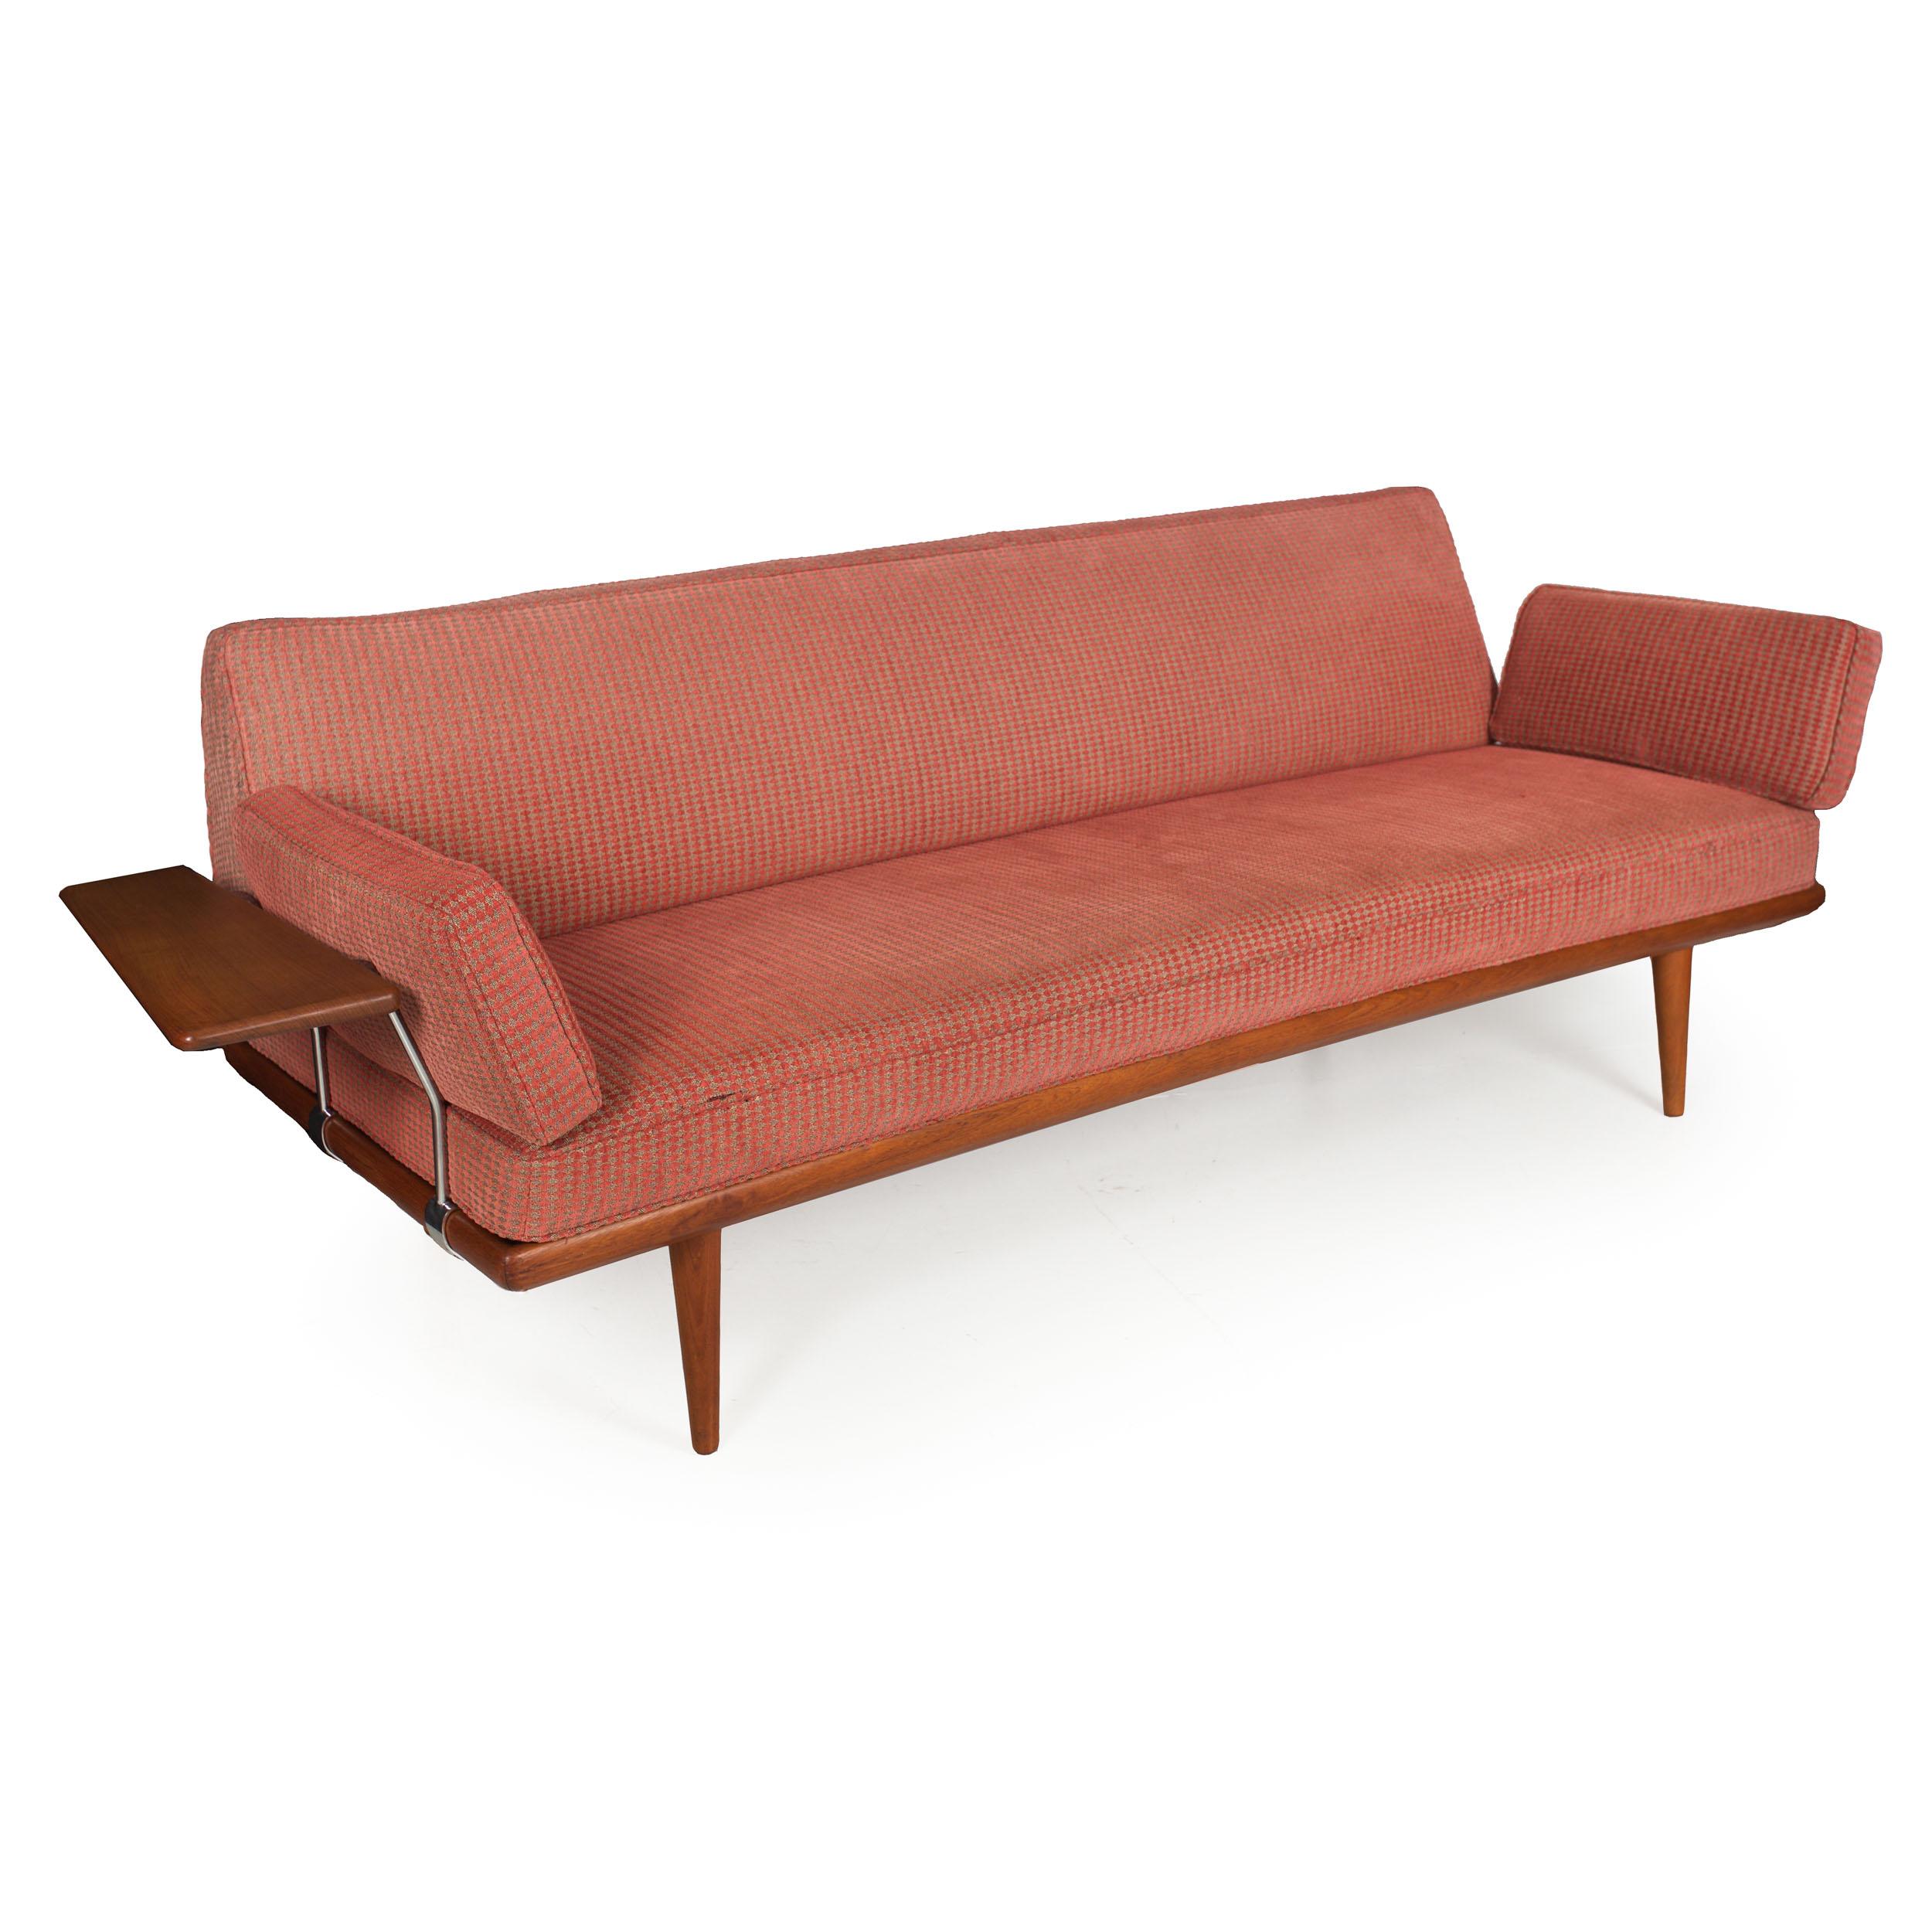 A wonderful sofa from Peter Hvidt and Orla Molgaard-Nielsen's 